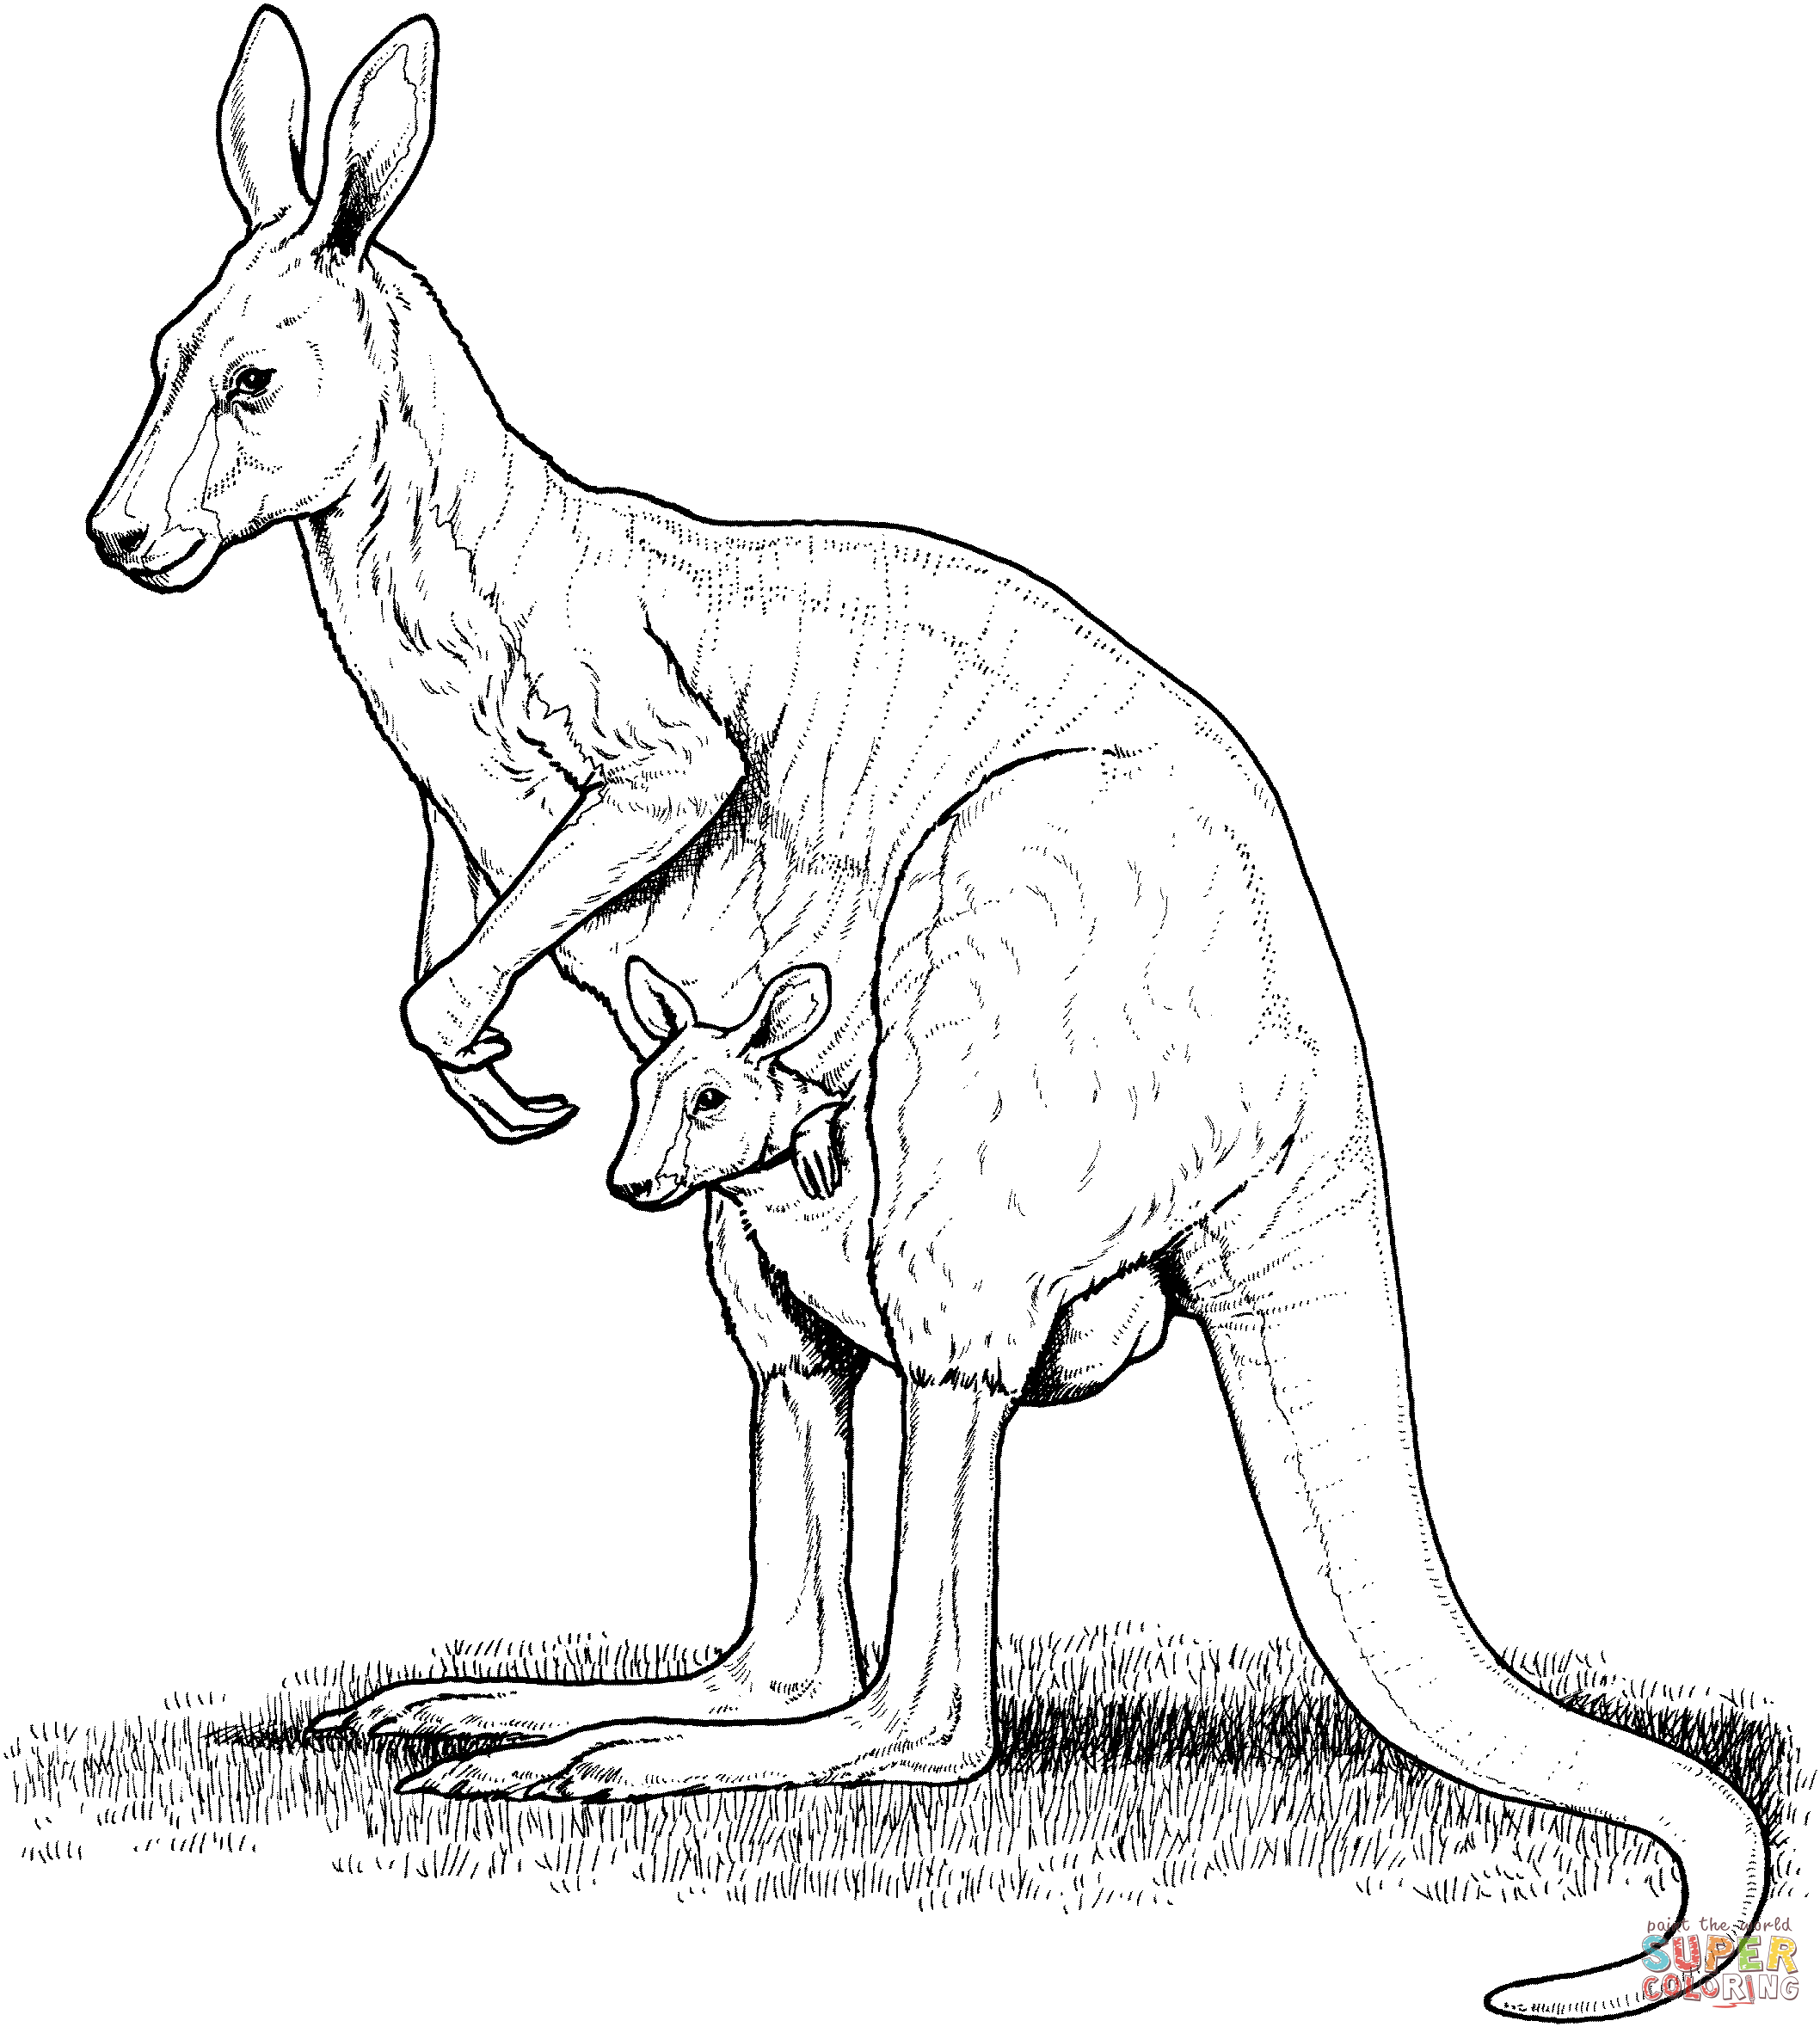 free-kangaroo-picture-to-color-download-free-kangaroo-picture-to-color